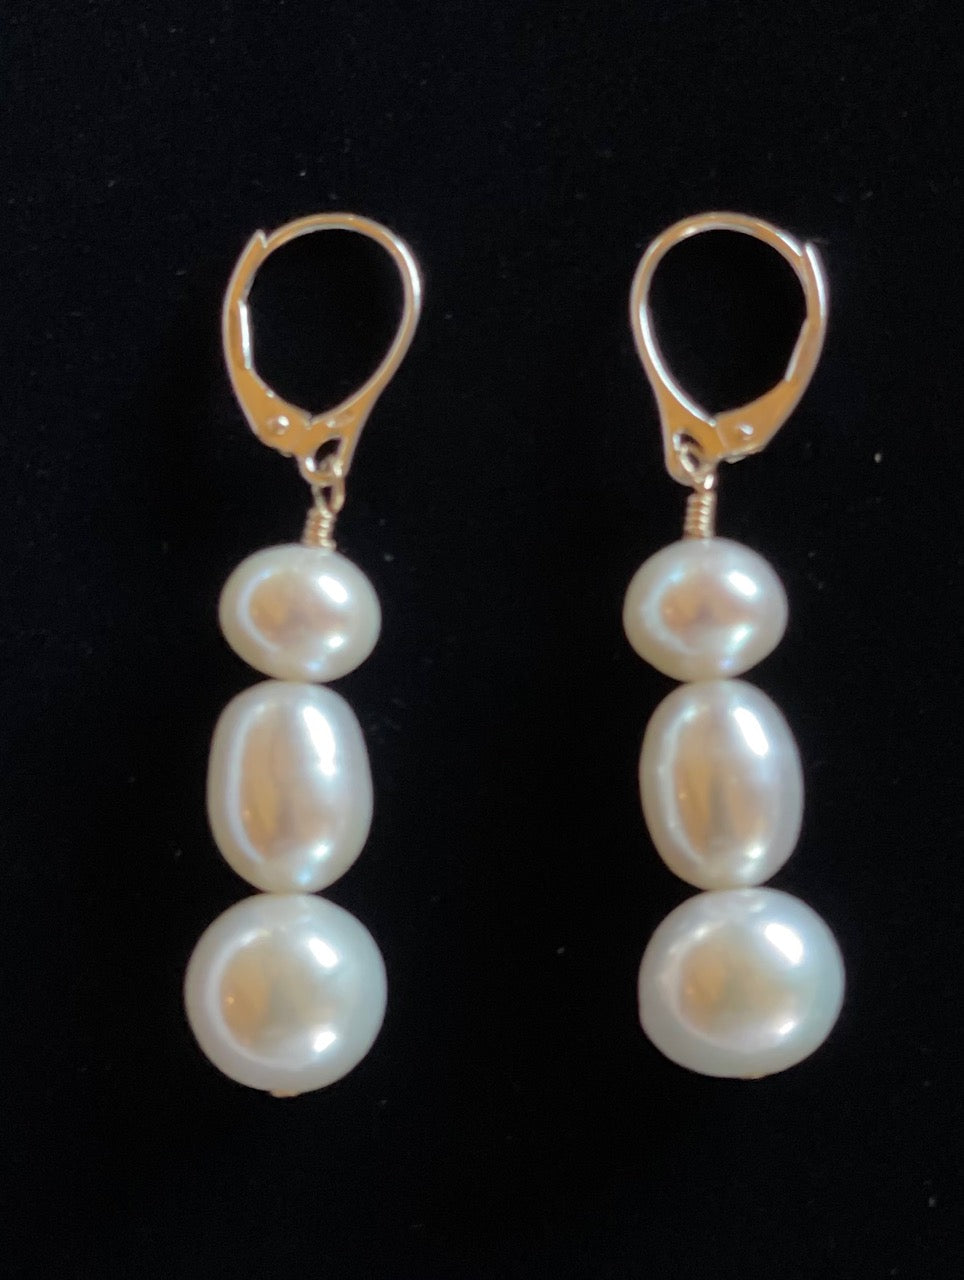 Earrings - Hanging earrings with 3 different shaped white pearls on sterling silver